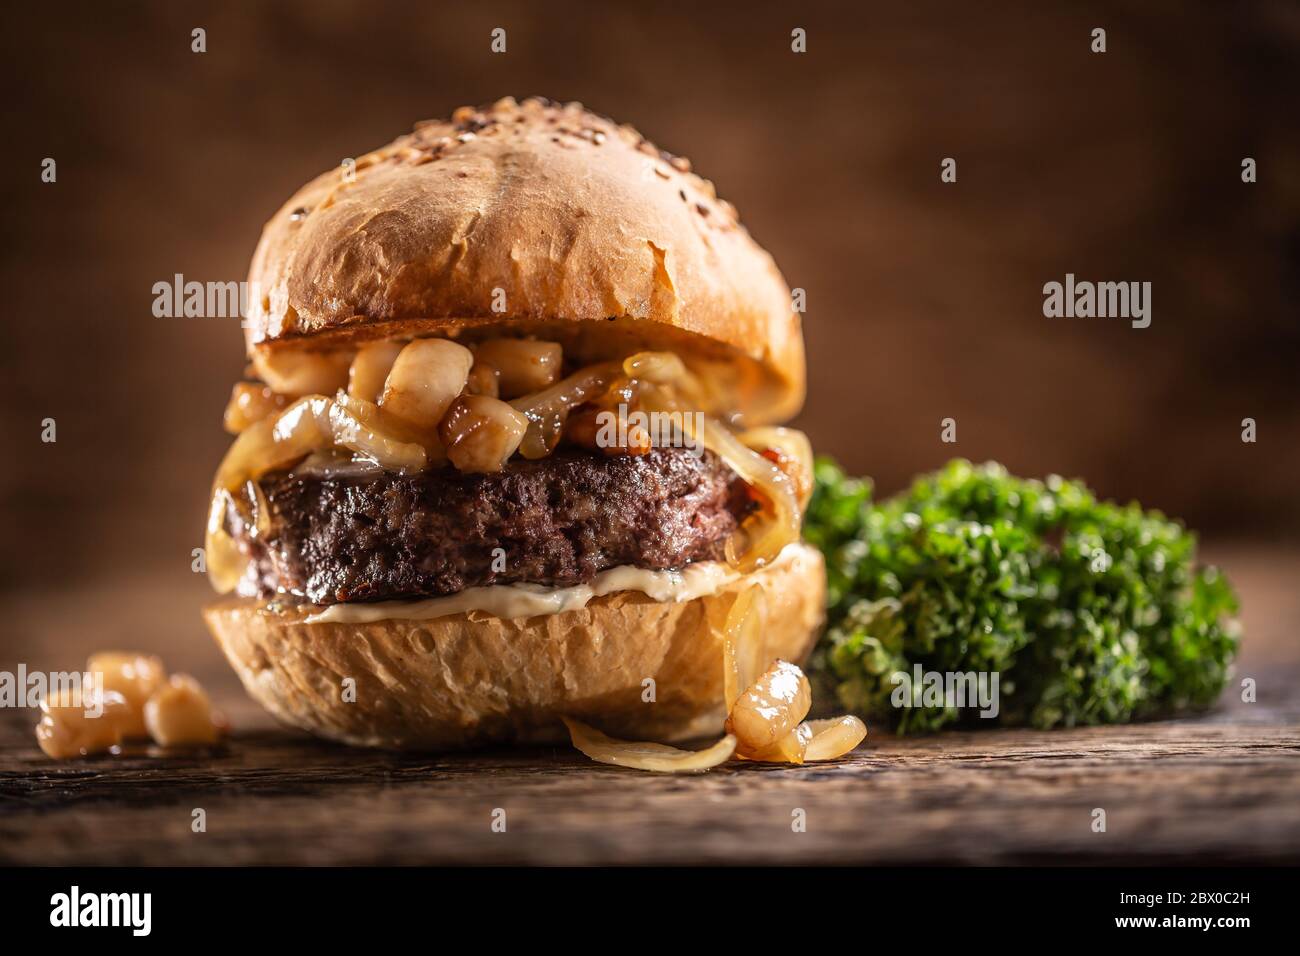 Beef burger with melted cheese, caramelized onions in a sesame bun with salad on the side Stock Photo